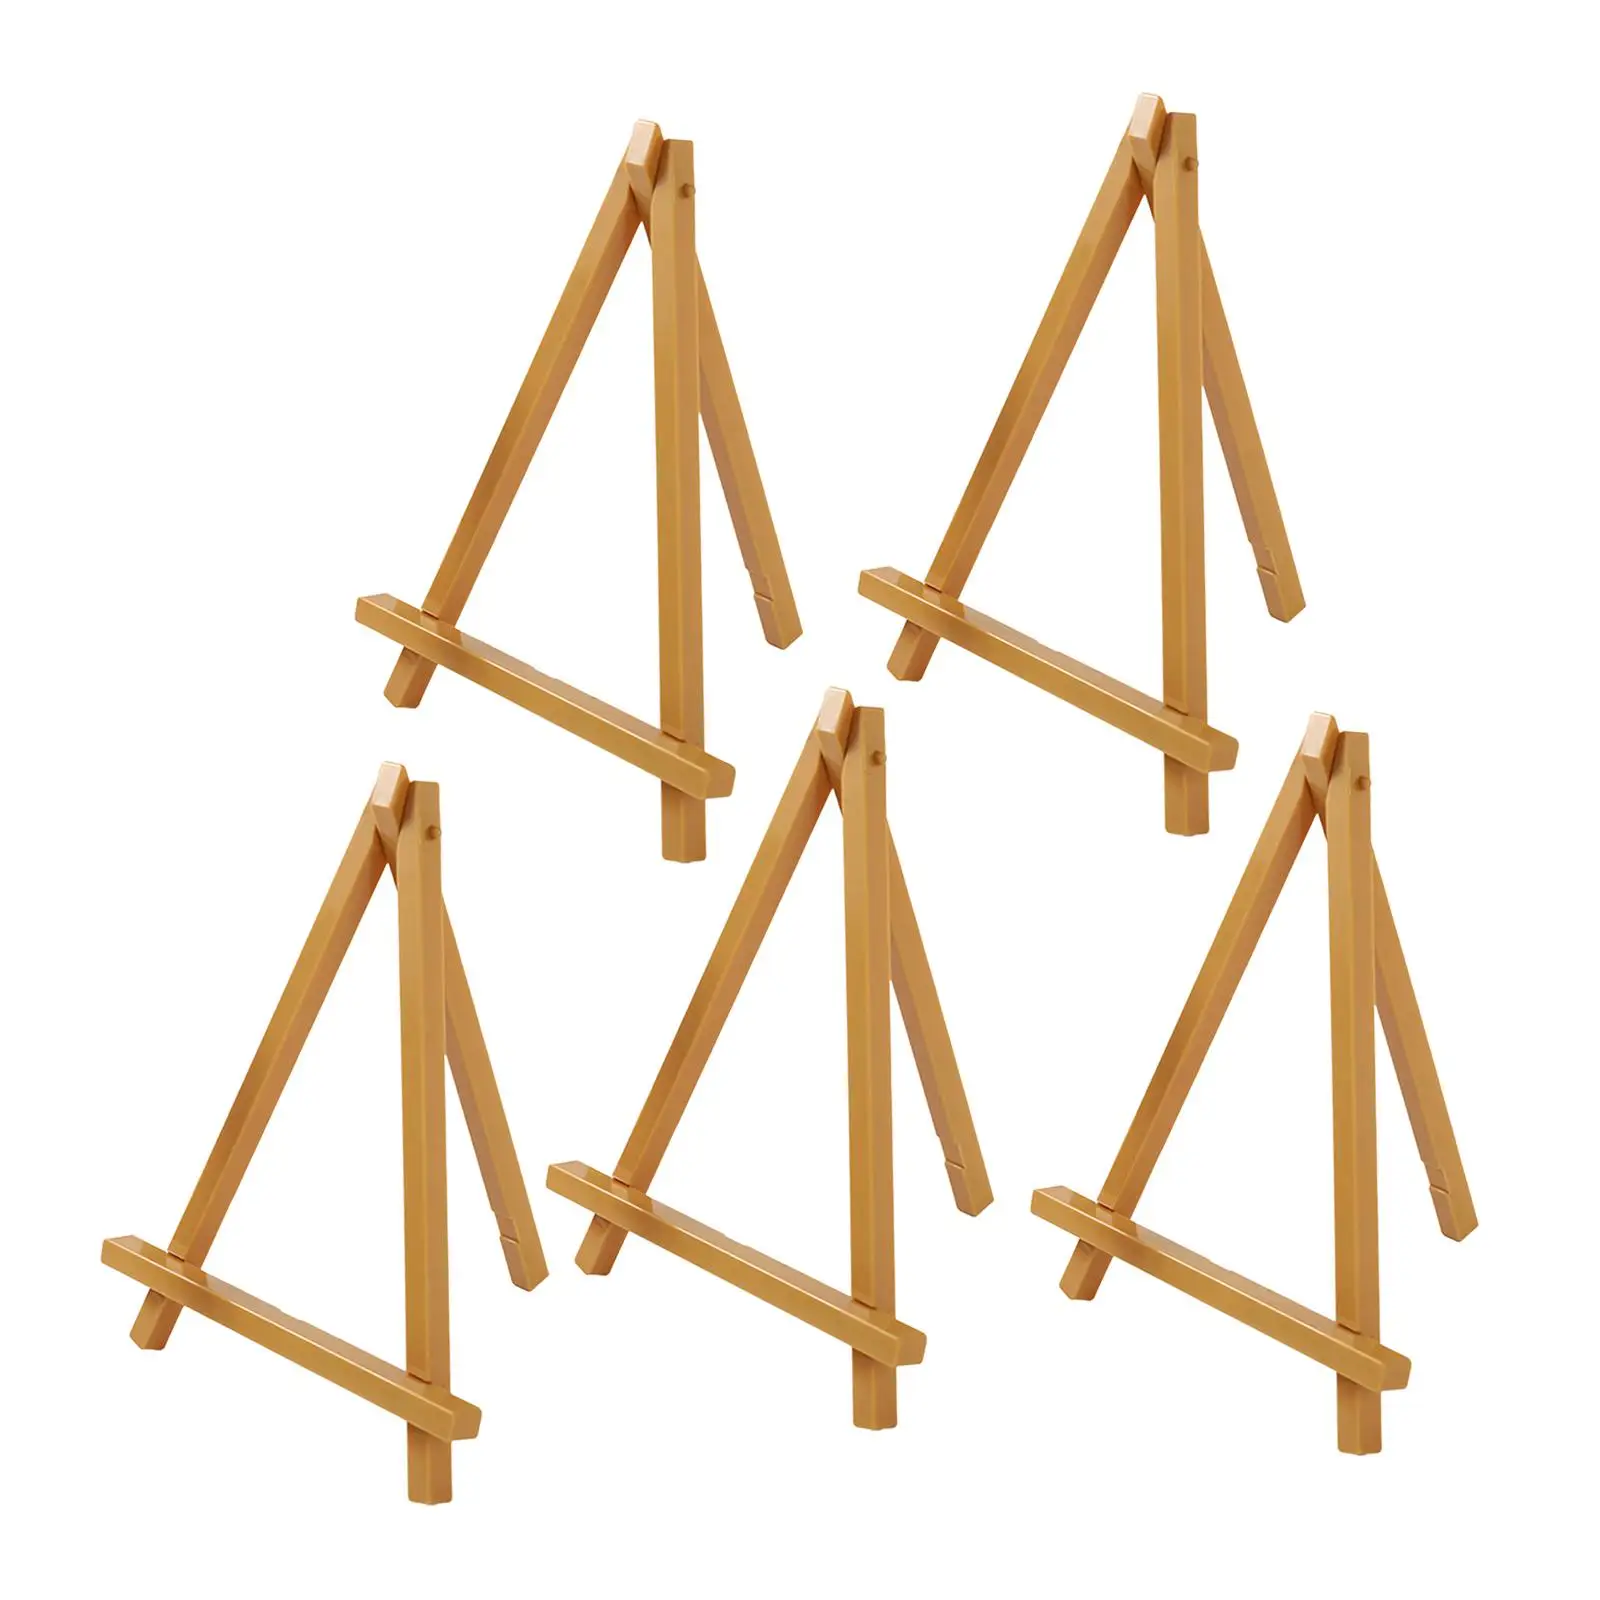 5 Pieces Wood Mini Easel Holder Cemetery Telescoping Easel Tripod Photo Posters Adjustable Height Artist Birthday Displaying Art